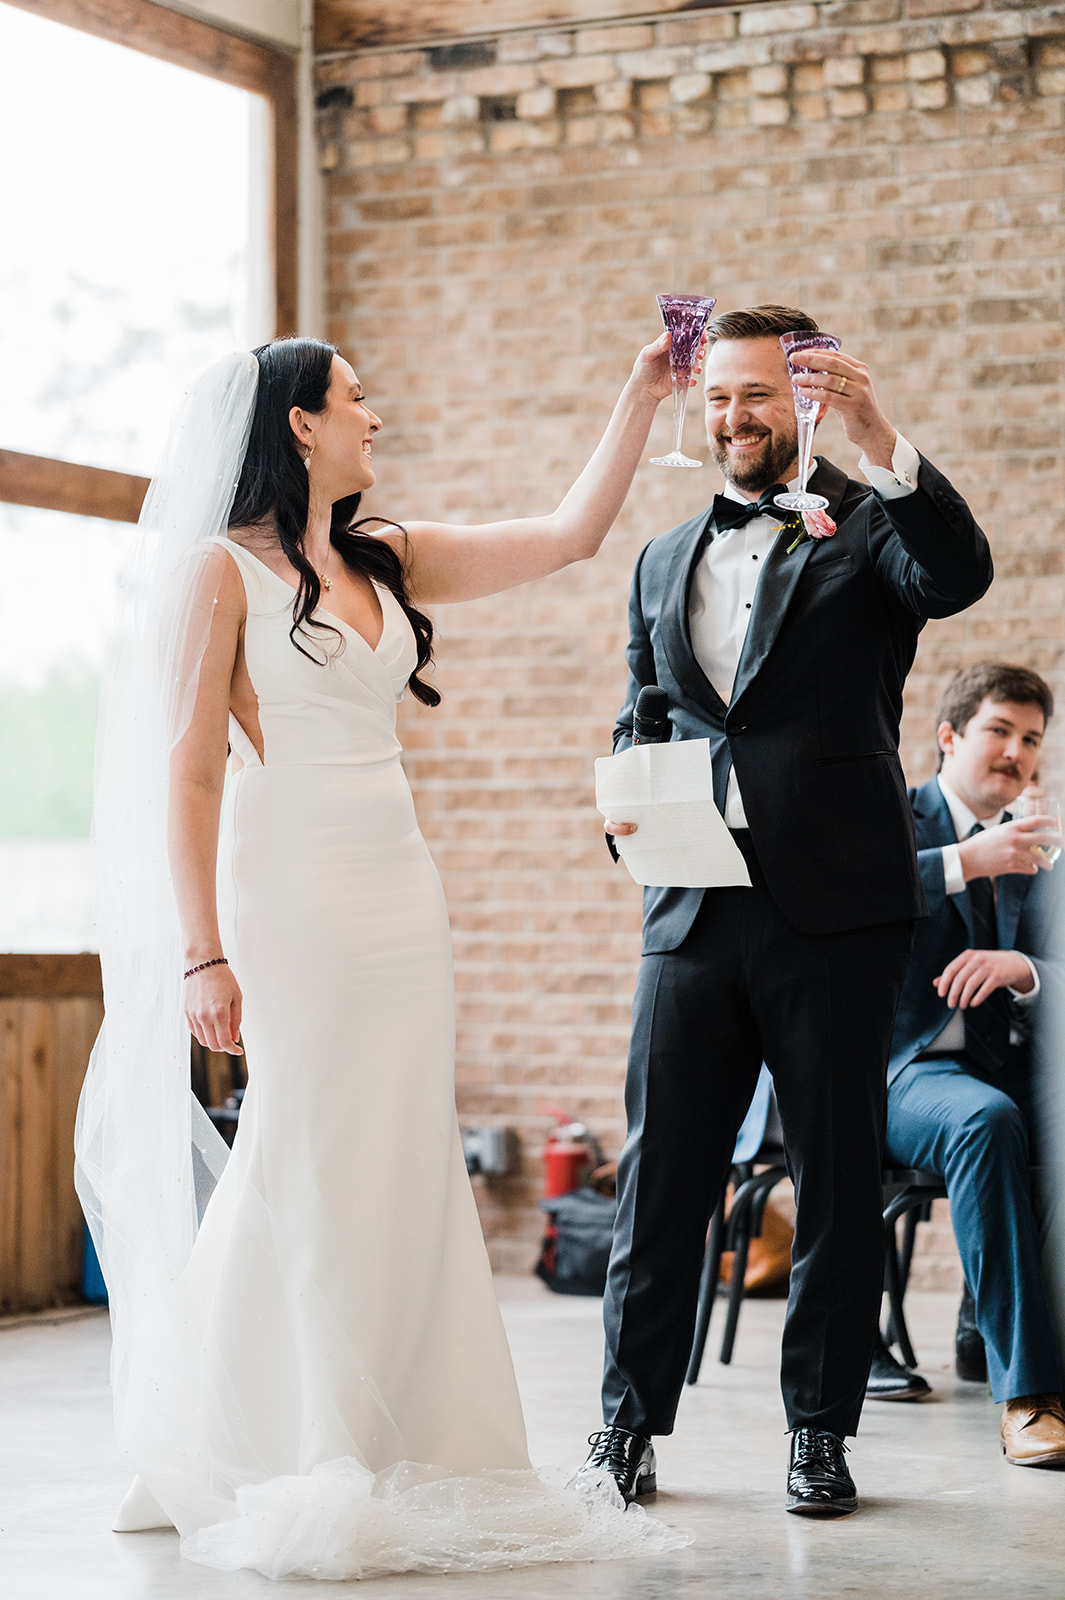 Newlyweds toasting with purple champagne flutes